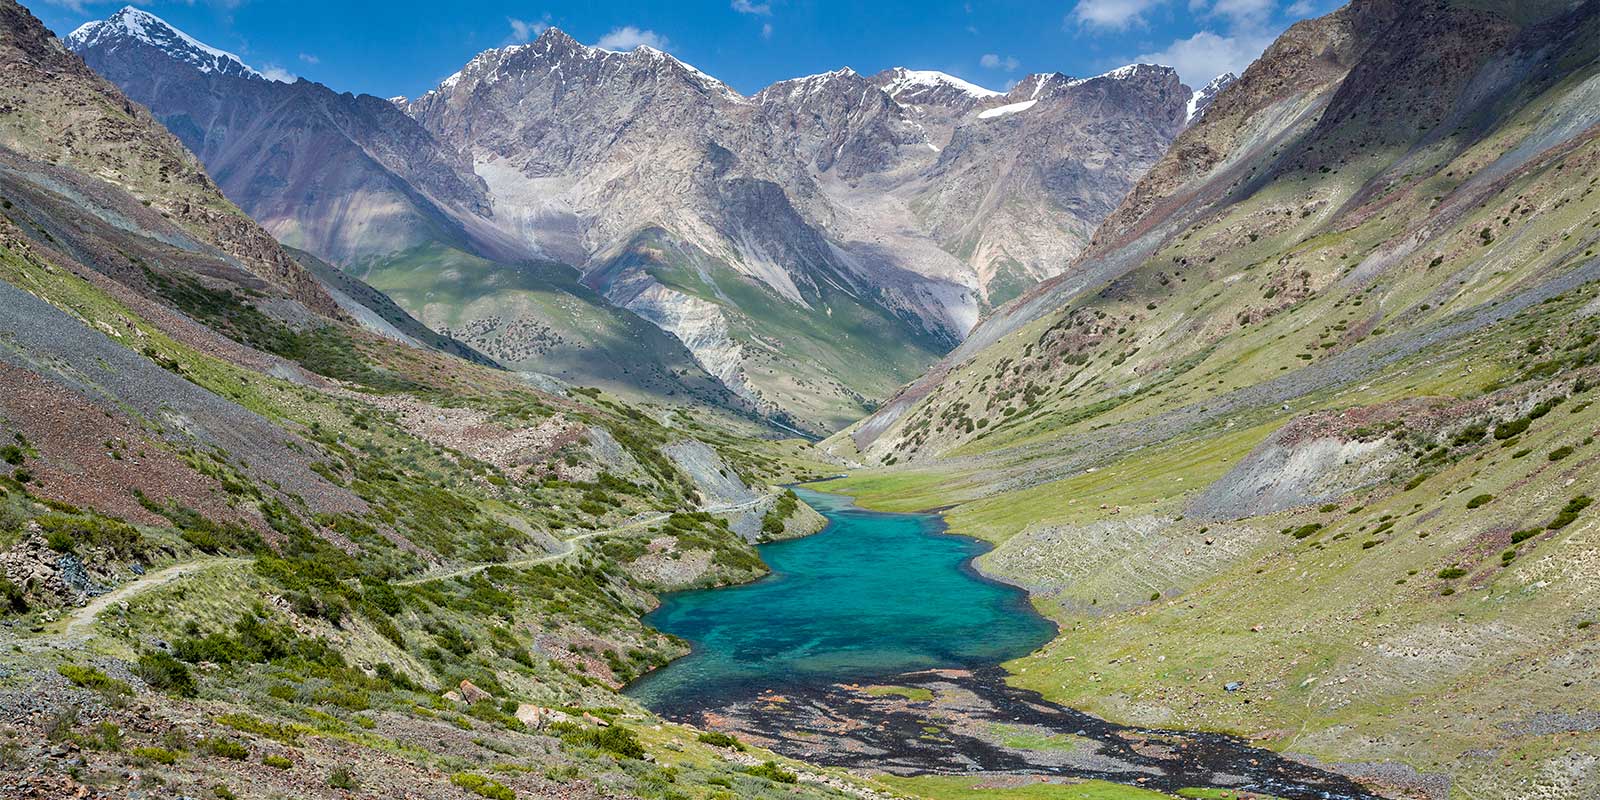 Lake in the Tien Shan Mountains, Kyrgyzstan